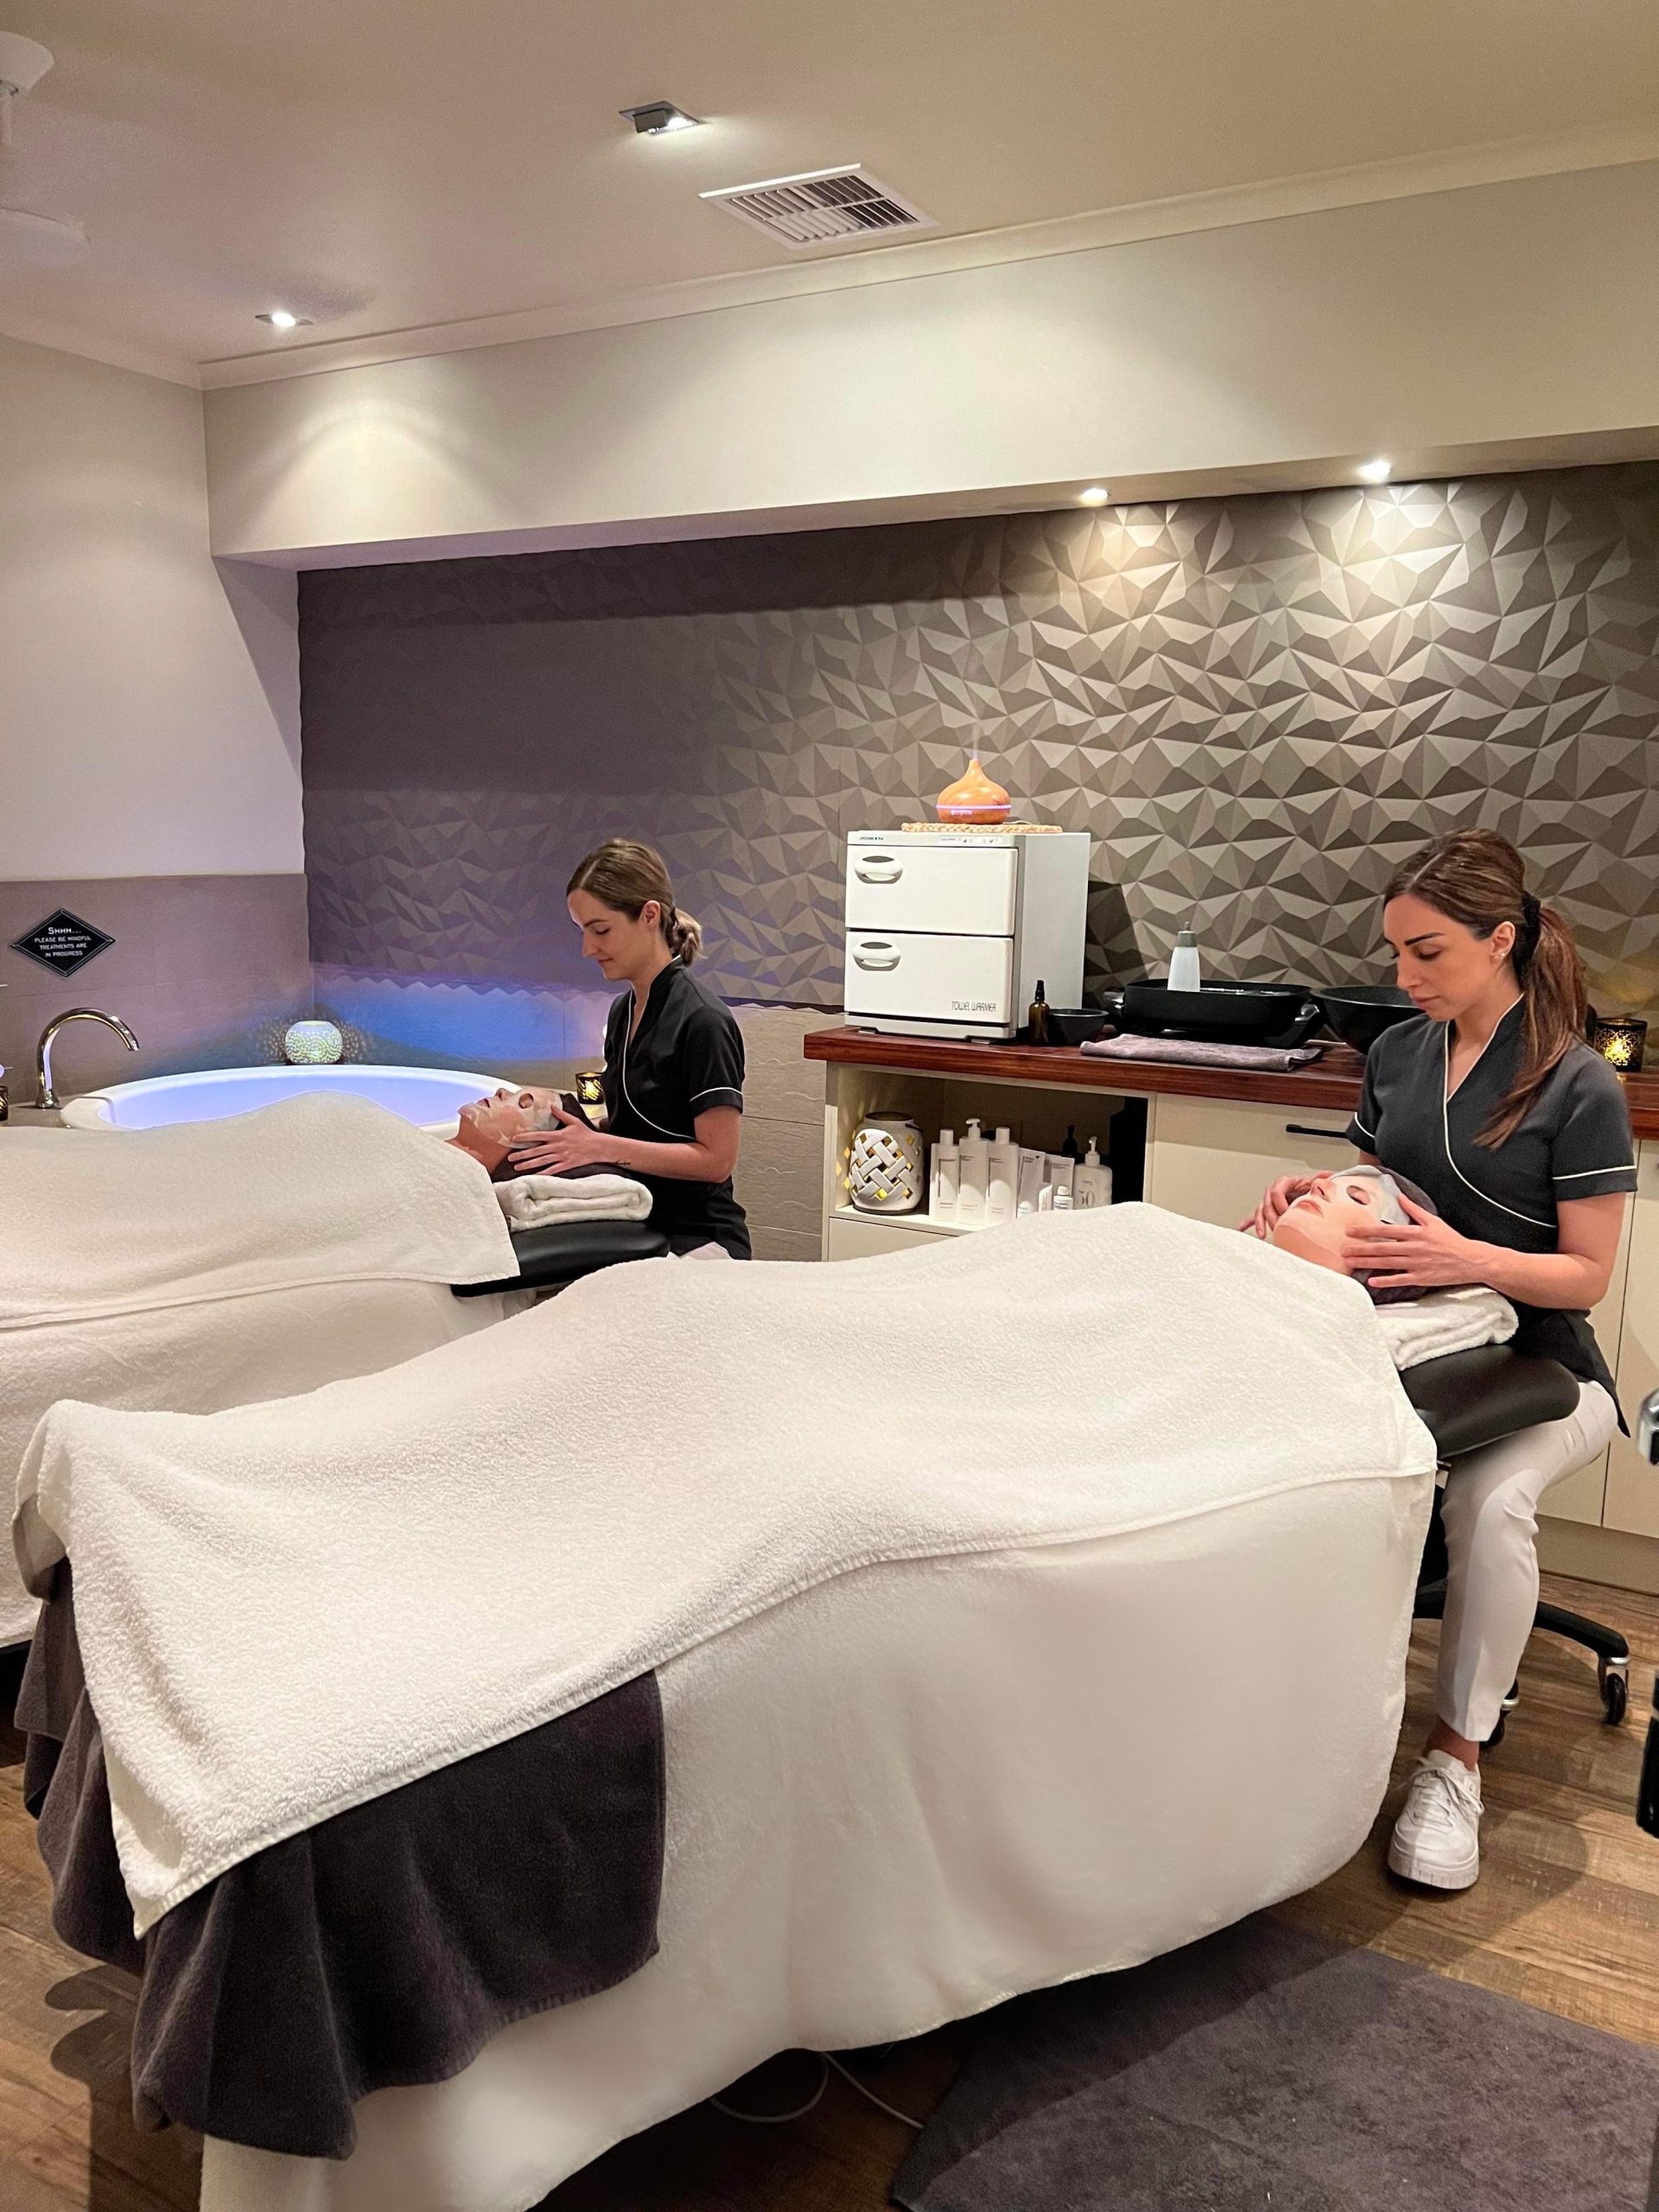 WIN A Luxurious Facial For 2 With A Platter + Bubbles At Temple Day Spa!